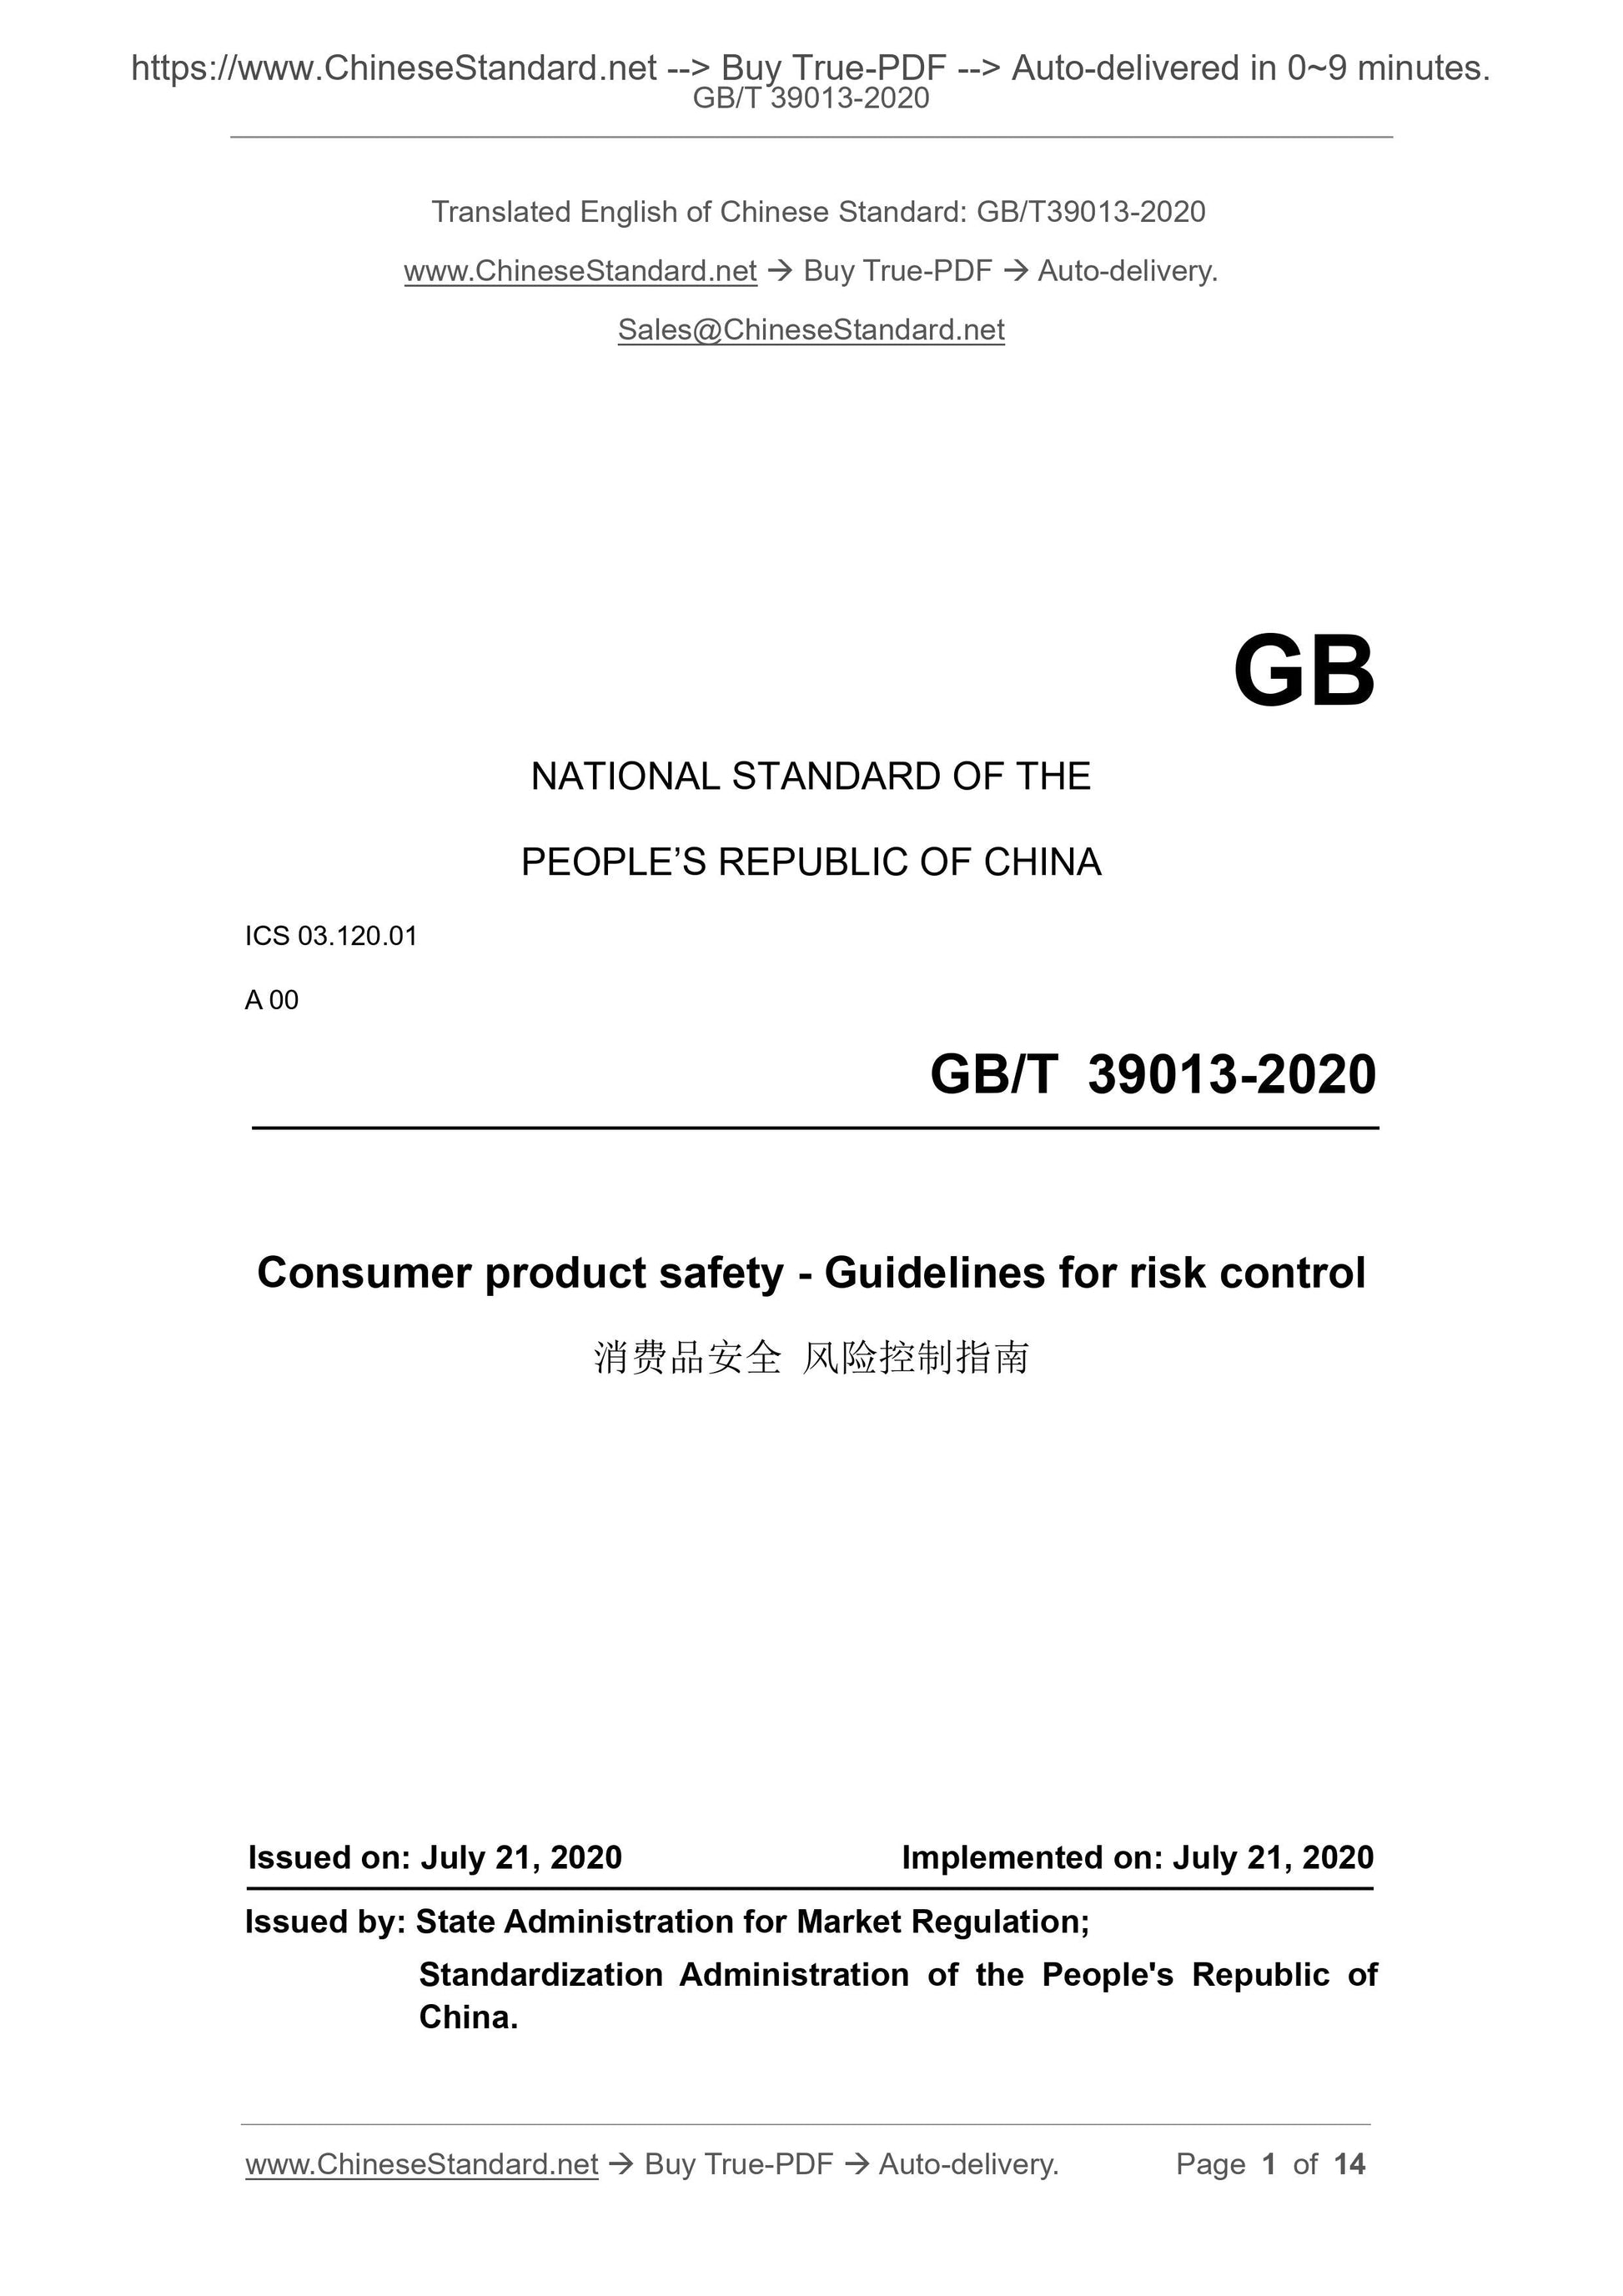 GB/T 39013-2020 Page 1